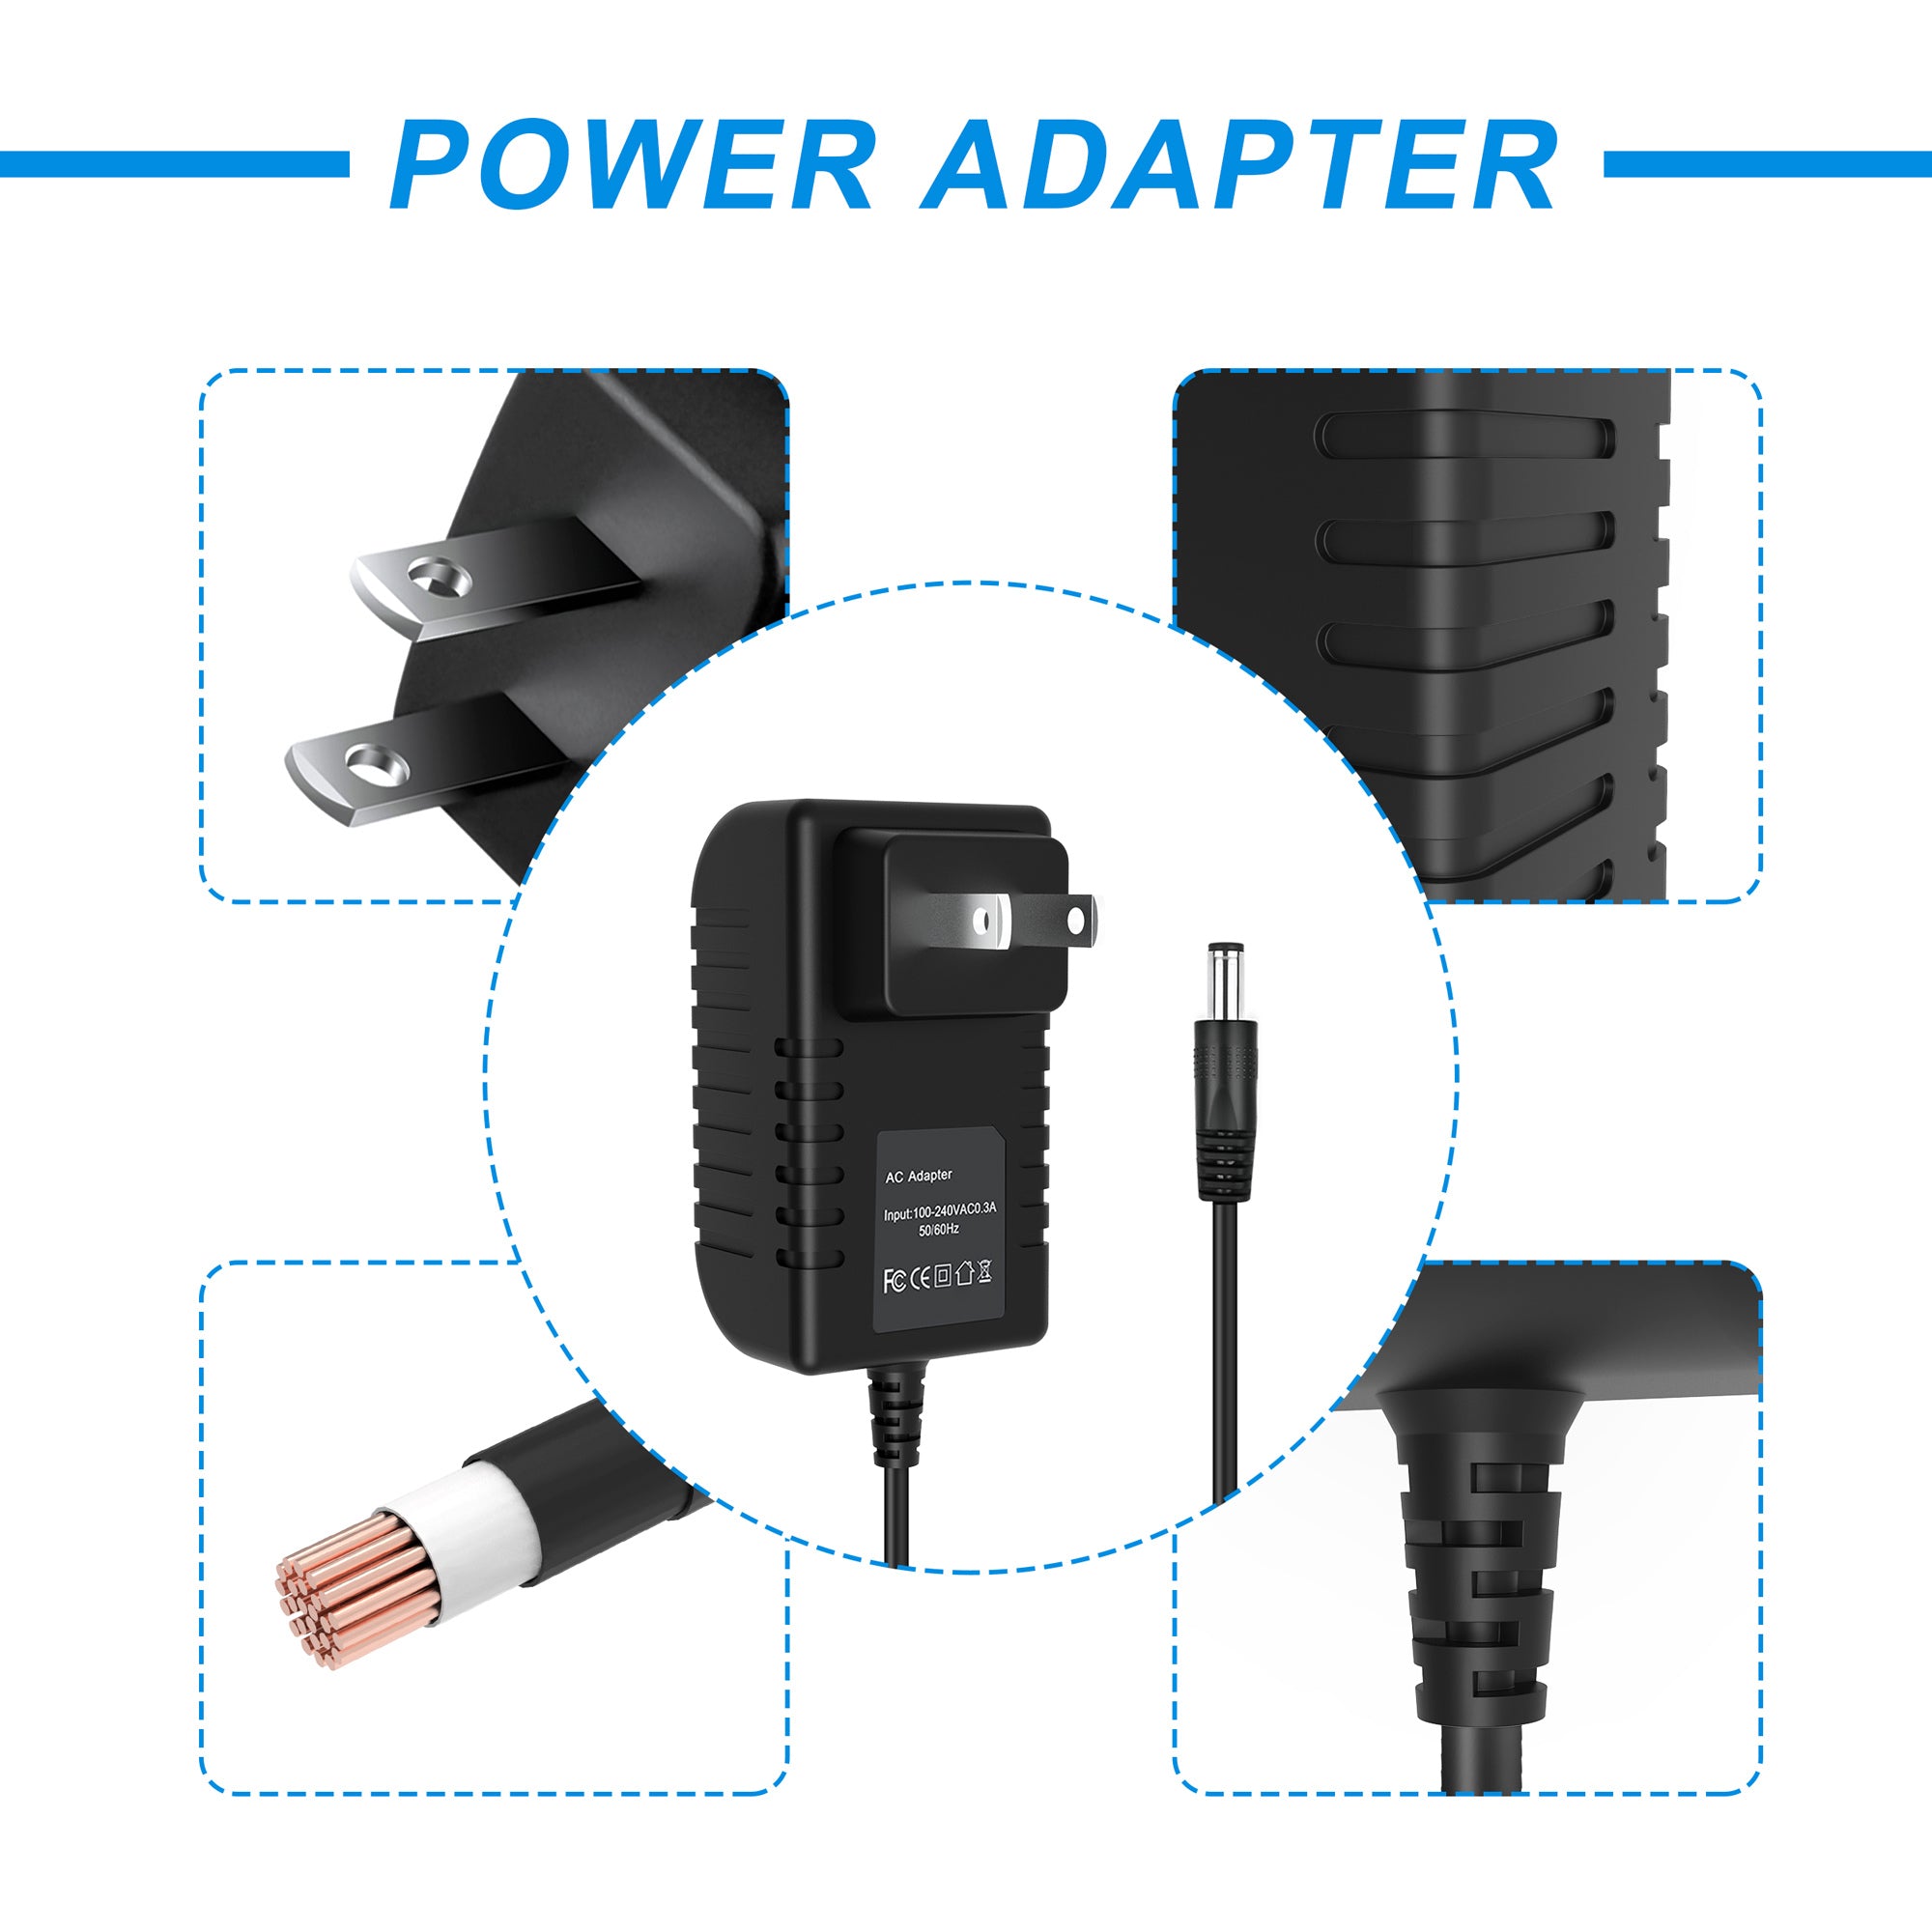 AbleGrid 5V AC Adapter Compatible with Zeepad 7inch Android Tablet PC Power Supply Cord Wall Charger PSU